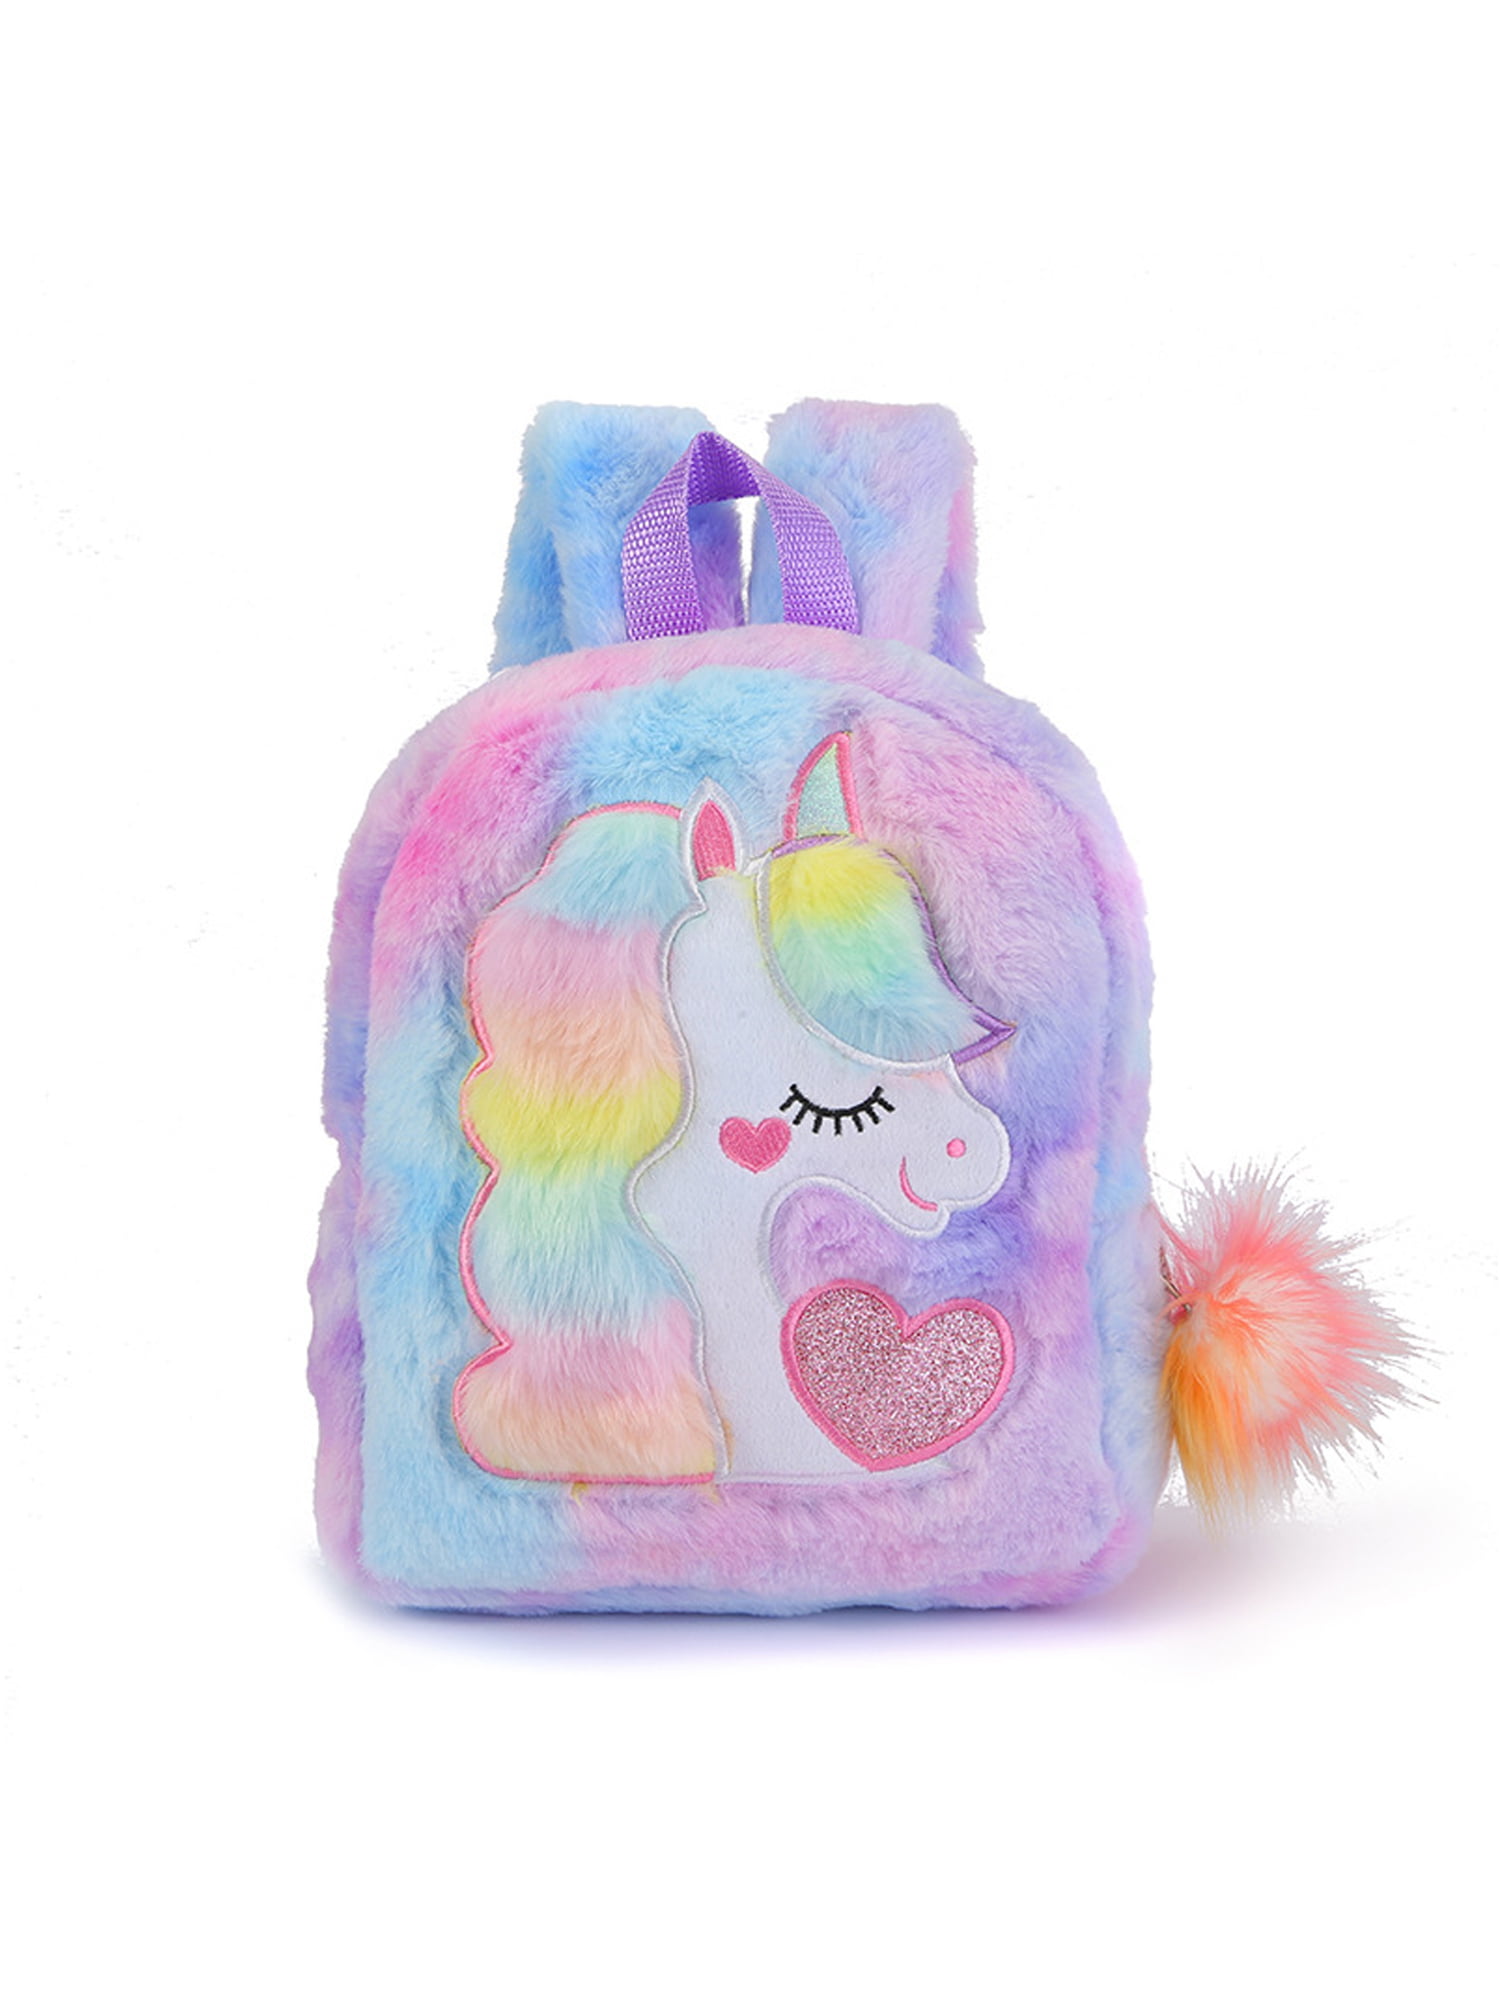 STYLISH BAG sOFT Material School Bag for kids Plush Backpack Cartoon Toy, Children's Gifts Boy/Girl/Baby/Decor School Bags for kids